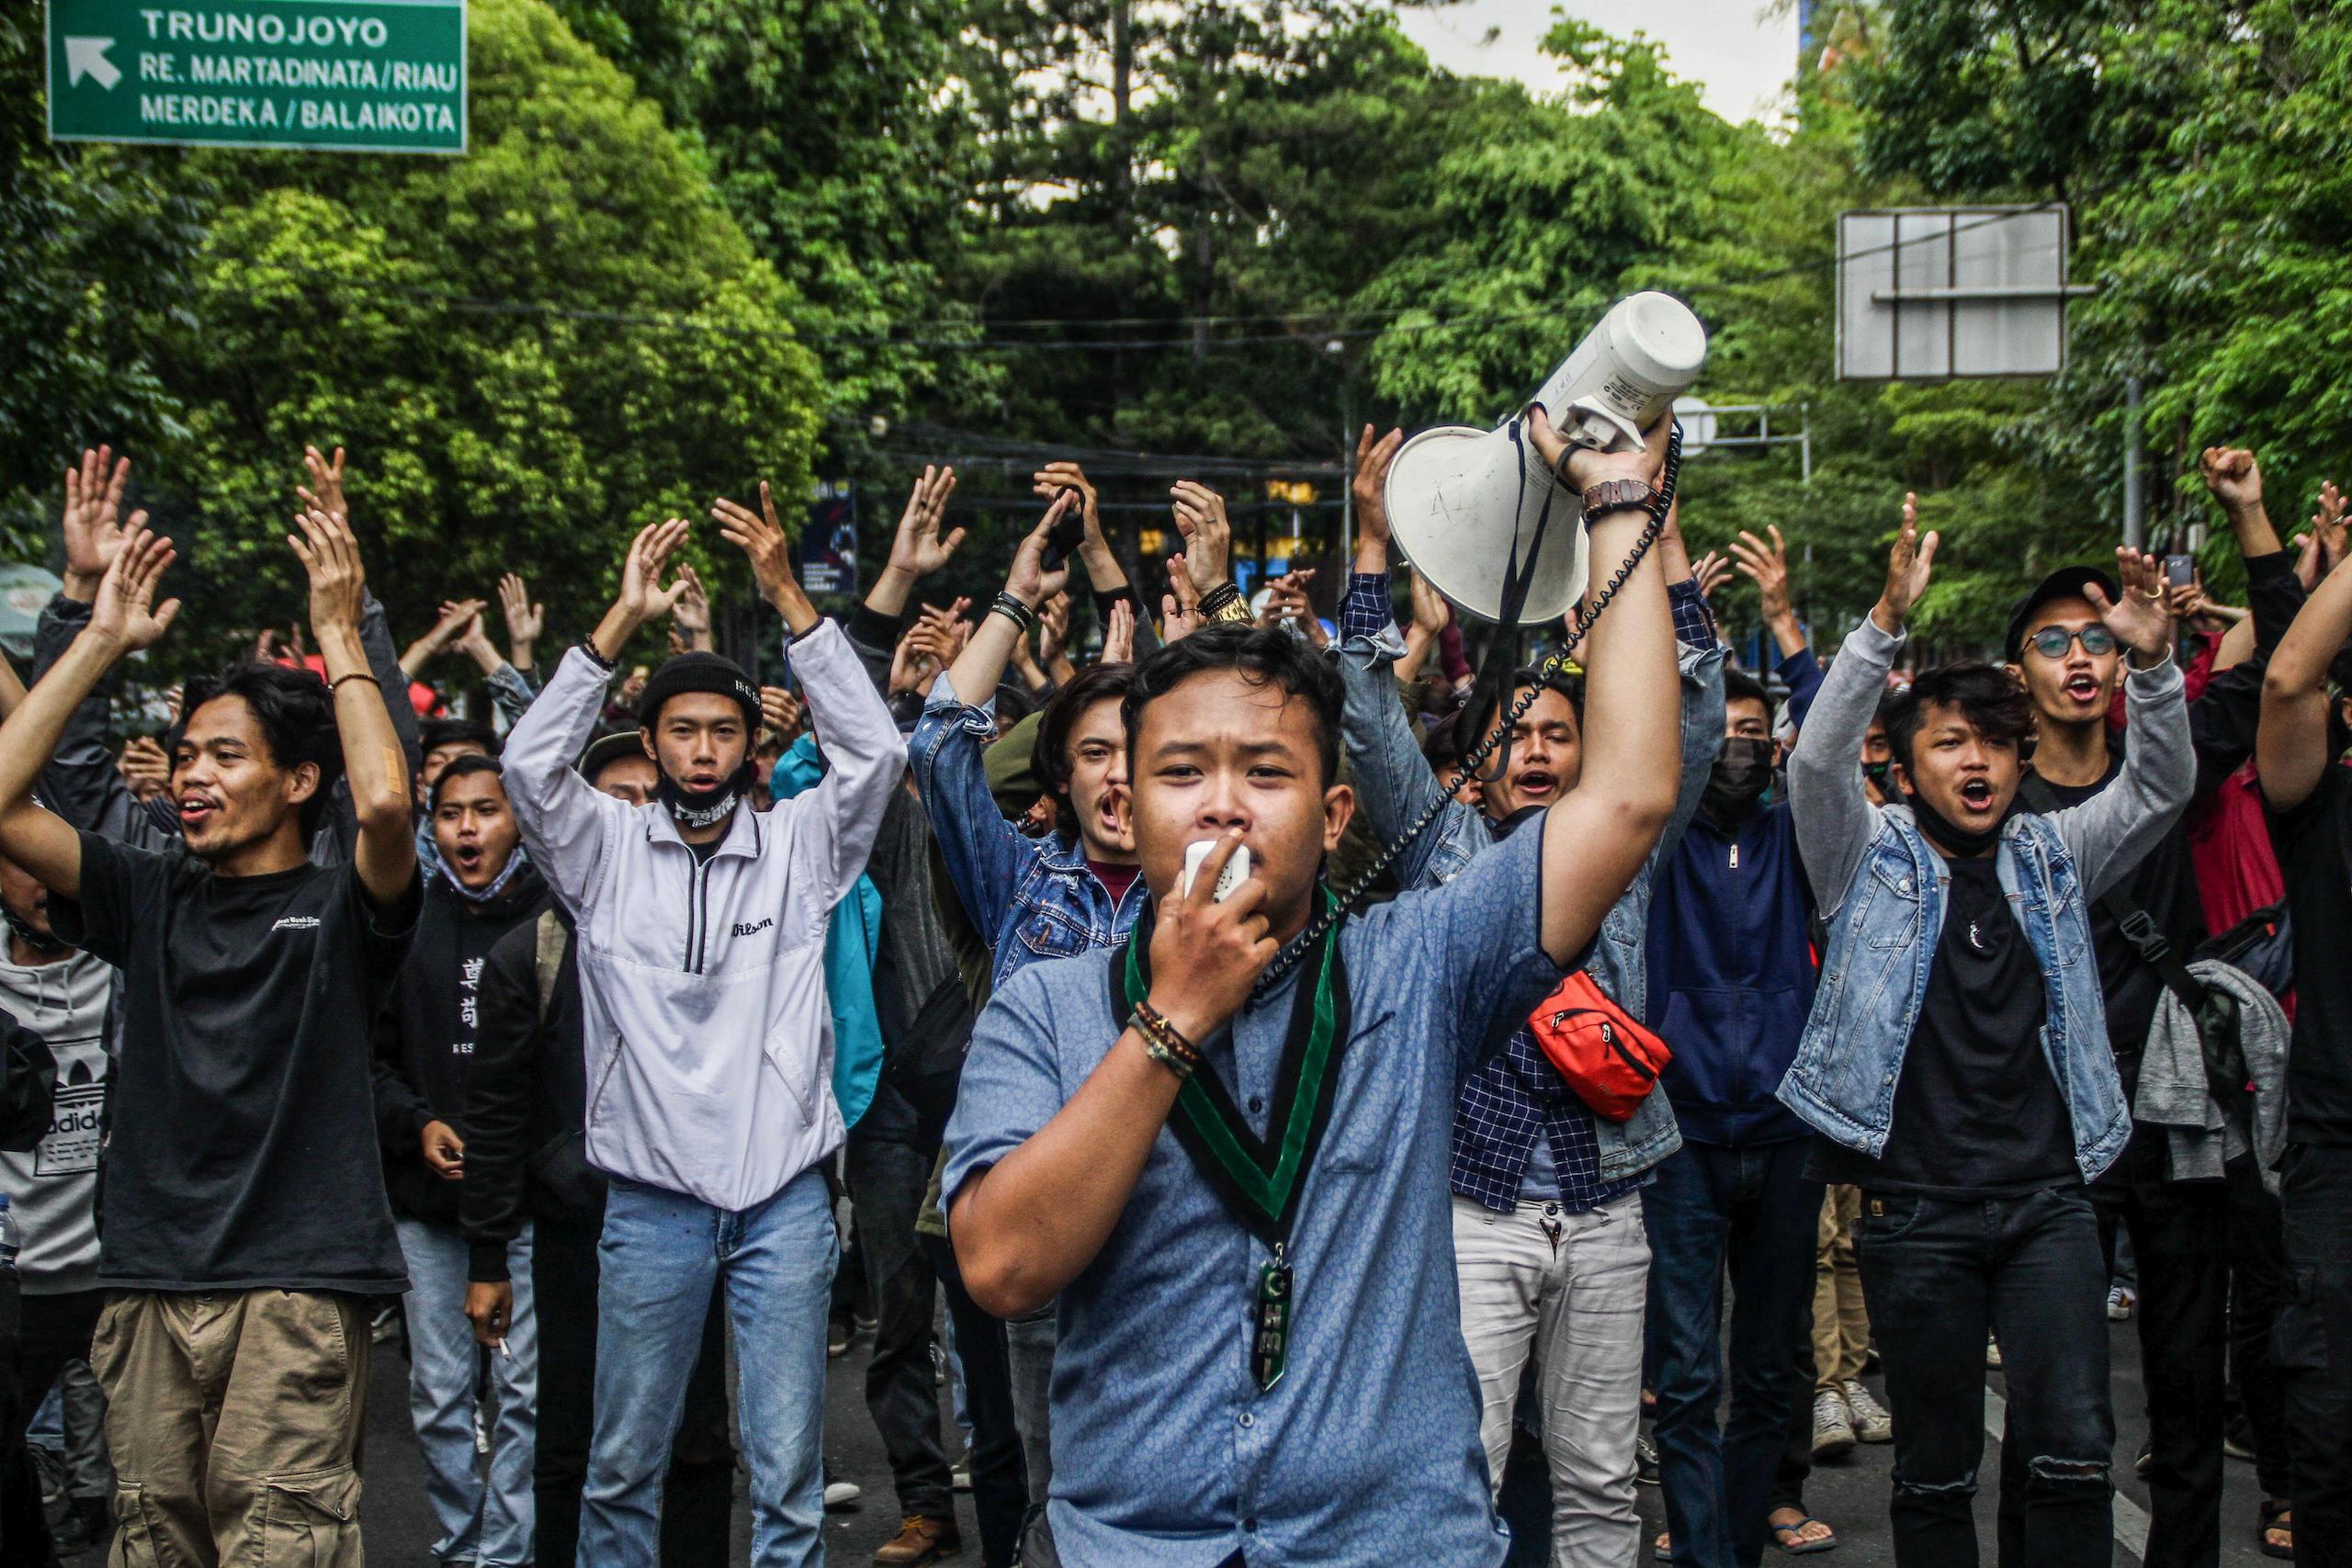 <p>A 2020 protest in Bandung against the Omnibus Law, which has attempted to reduce regulatory requirements for business permits and land acquisition in Indonesia (Image: Alamy)</p>